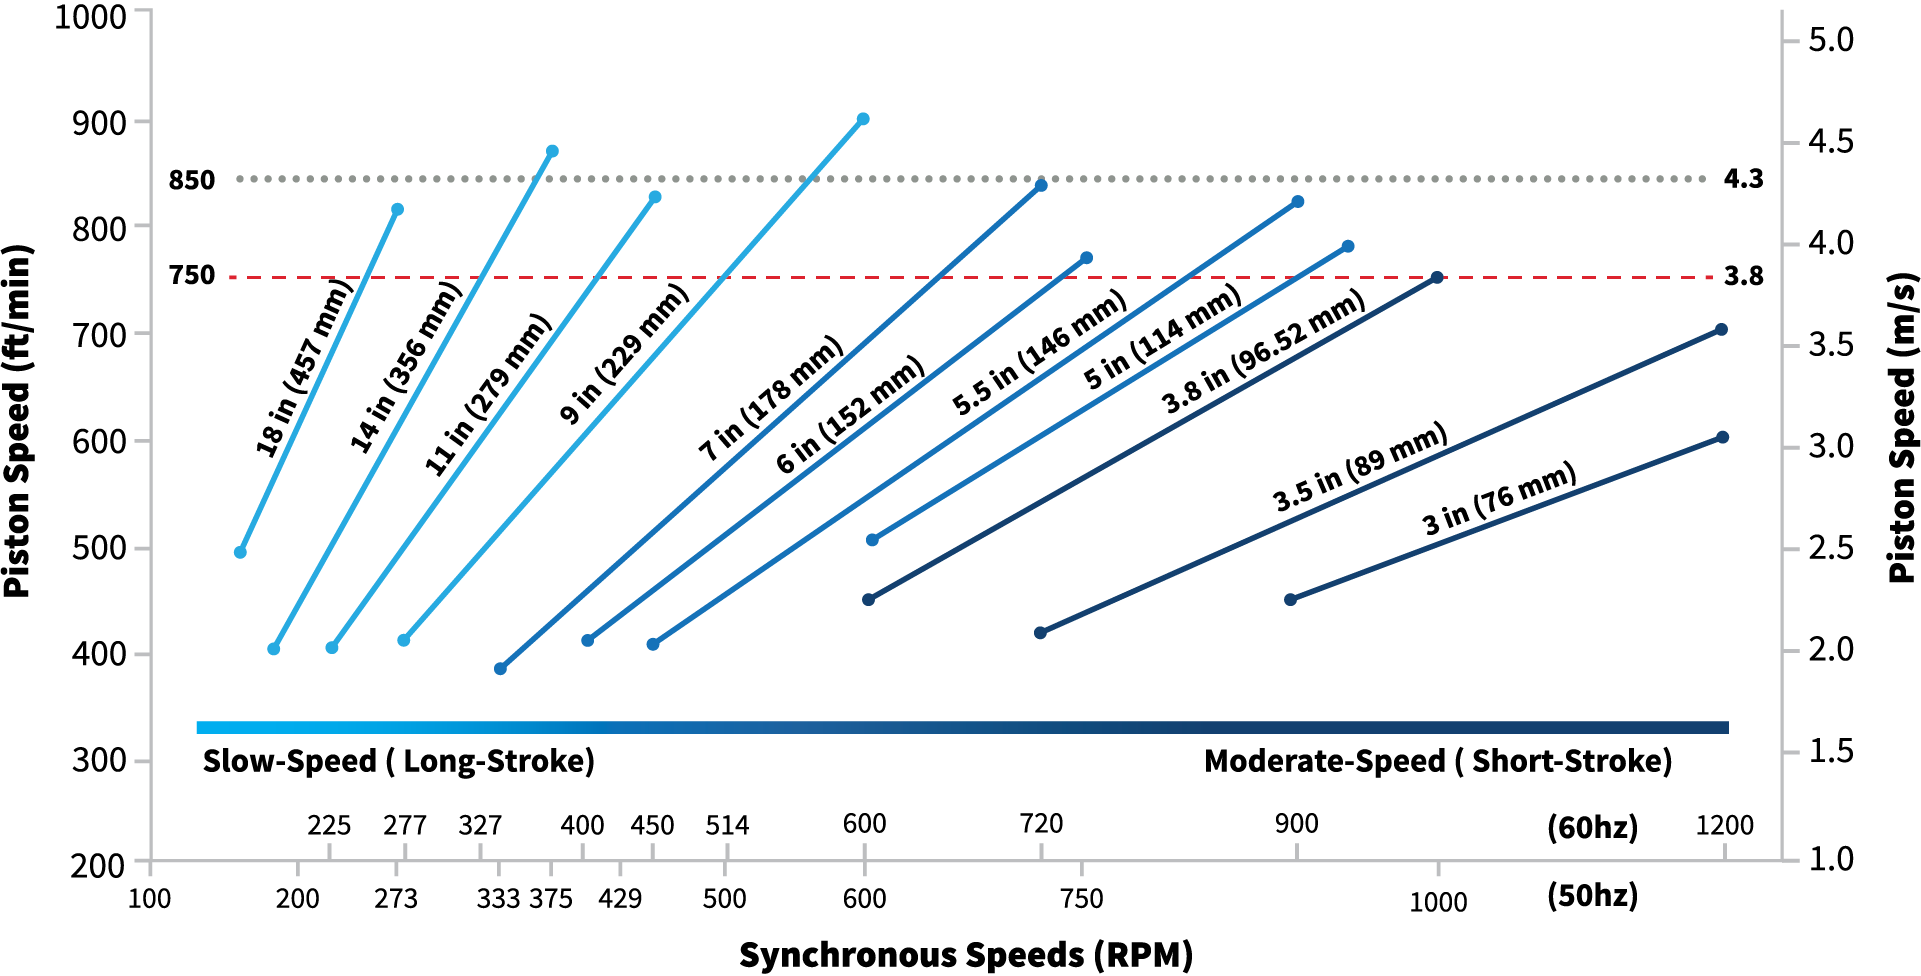 A graph highlighting the process speed graph, with synchronous speeds on the X axis and the piston speed on the Y axis